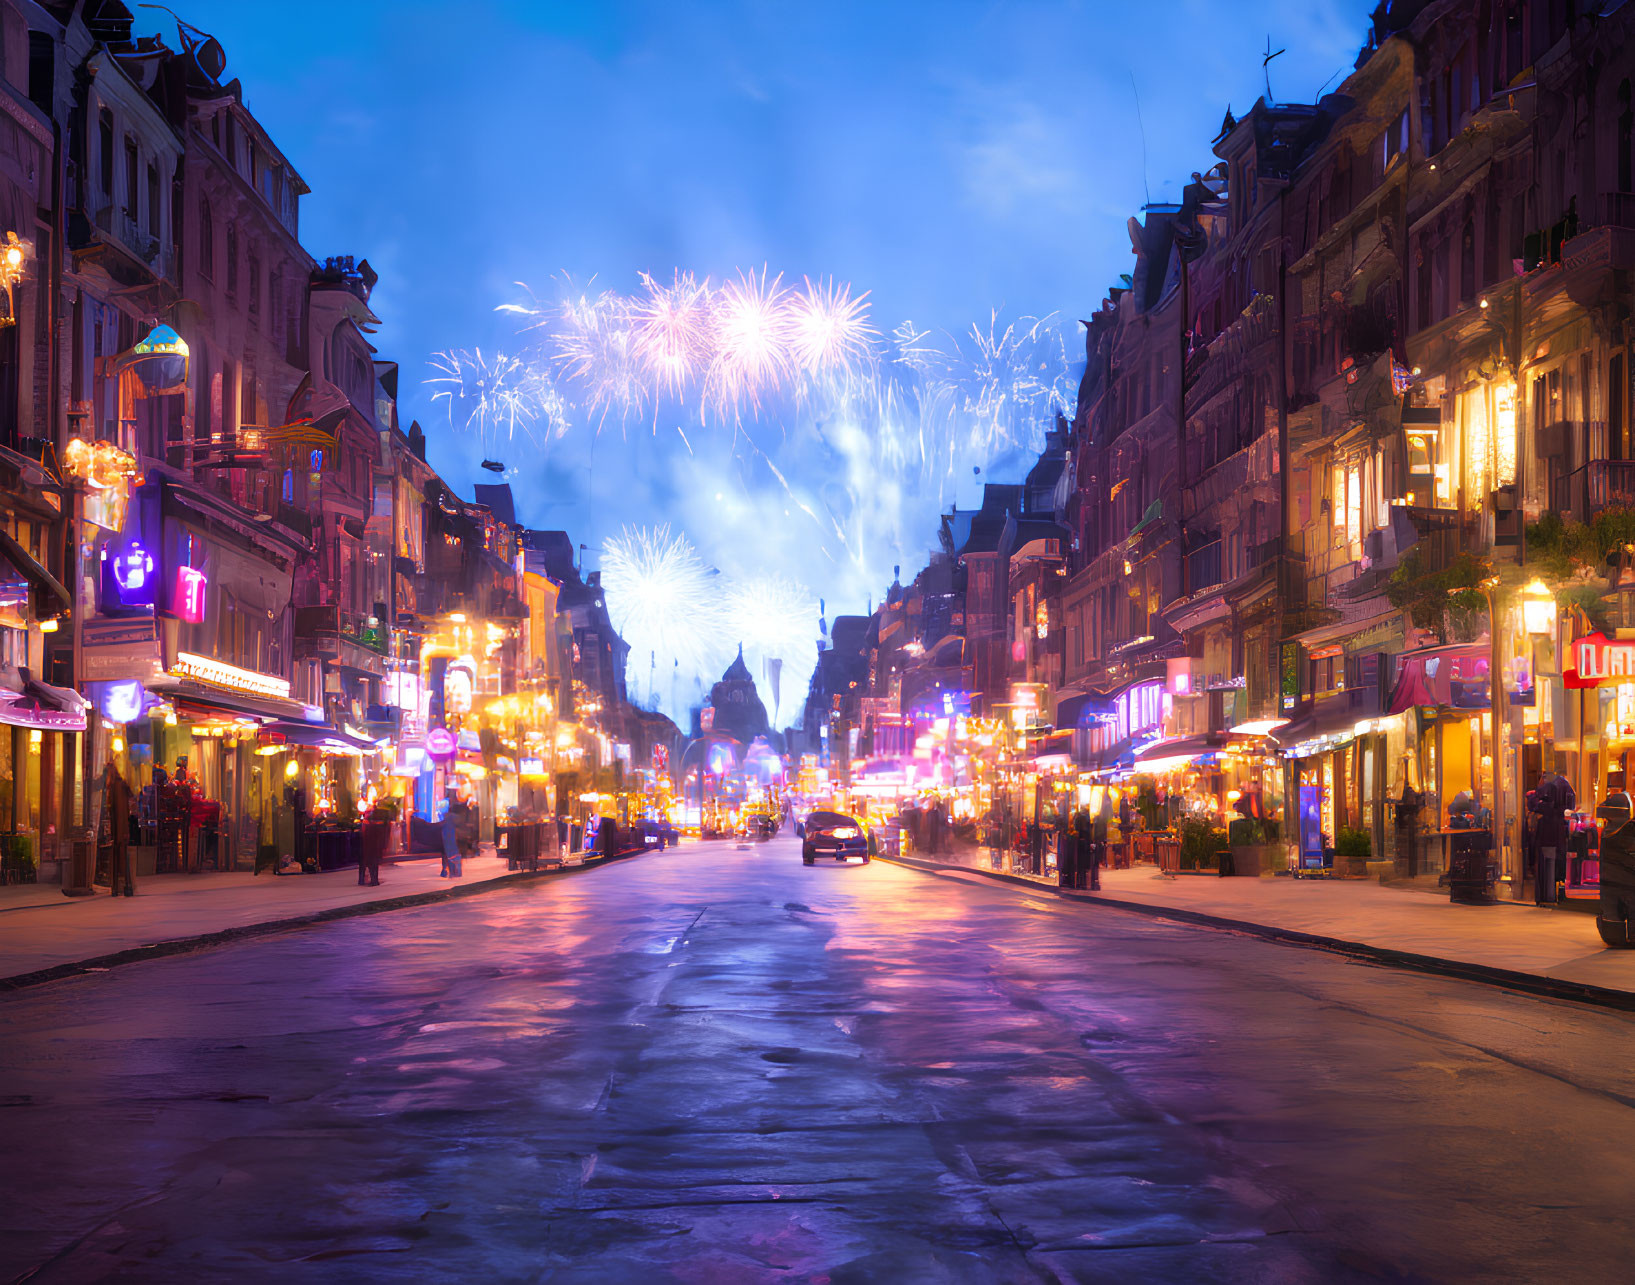 Twilight city street with neon signs and fireworks display